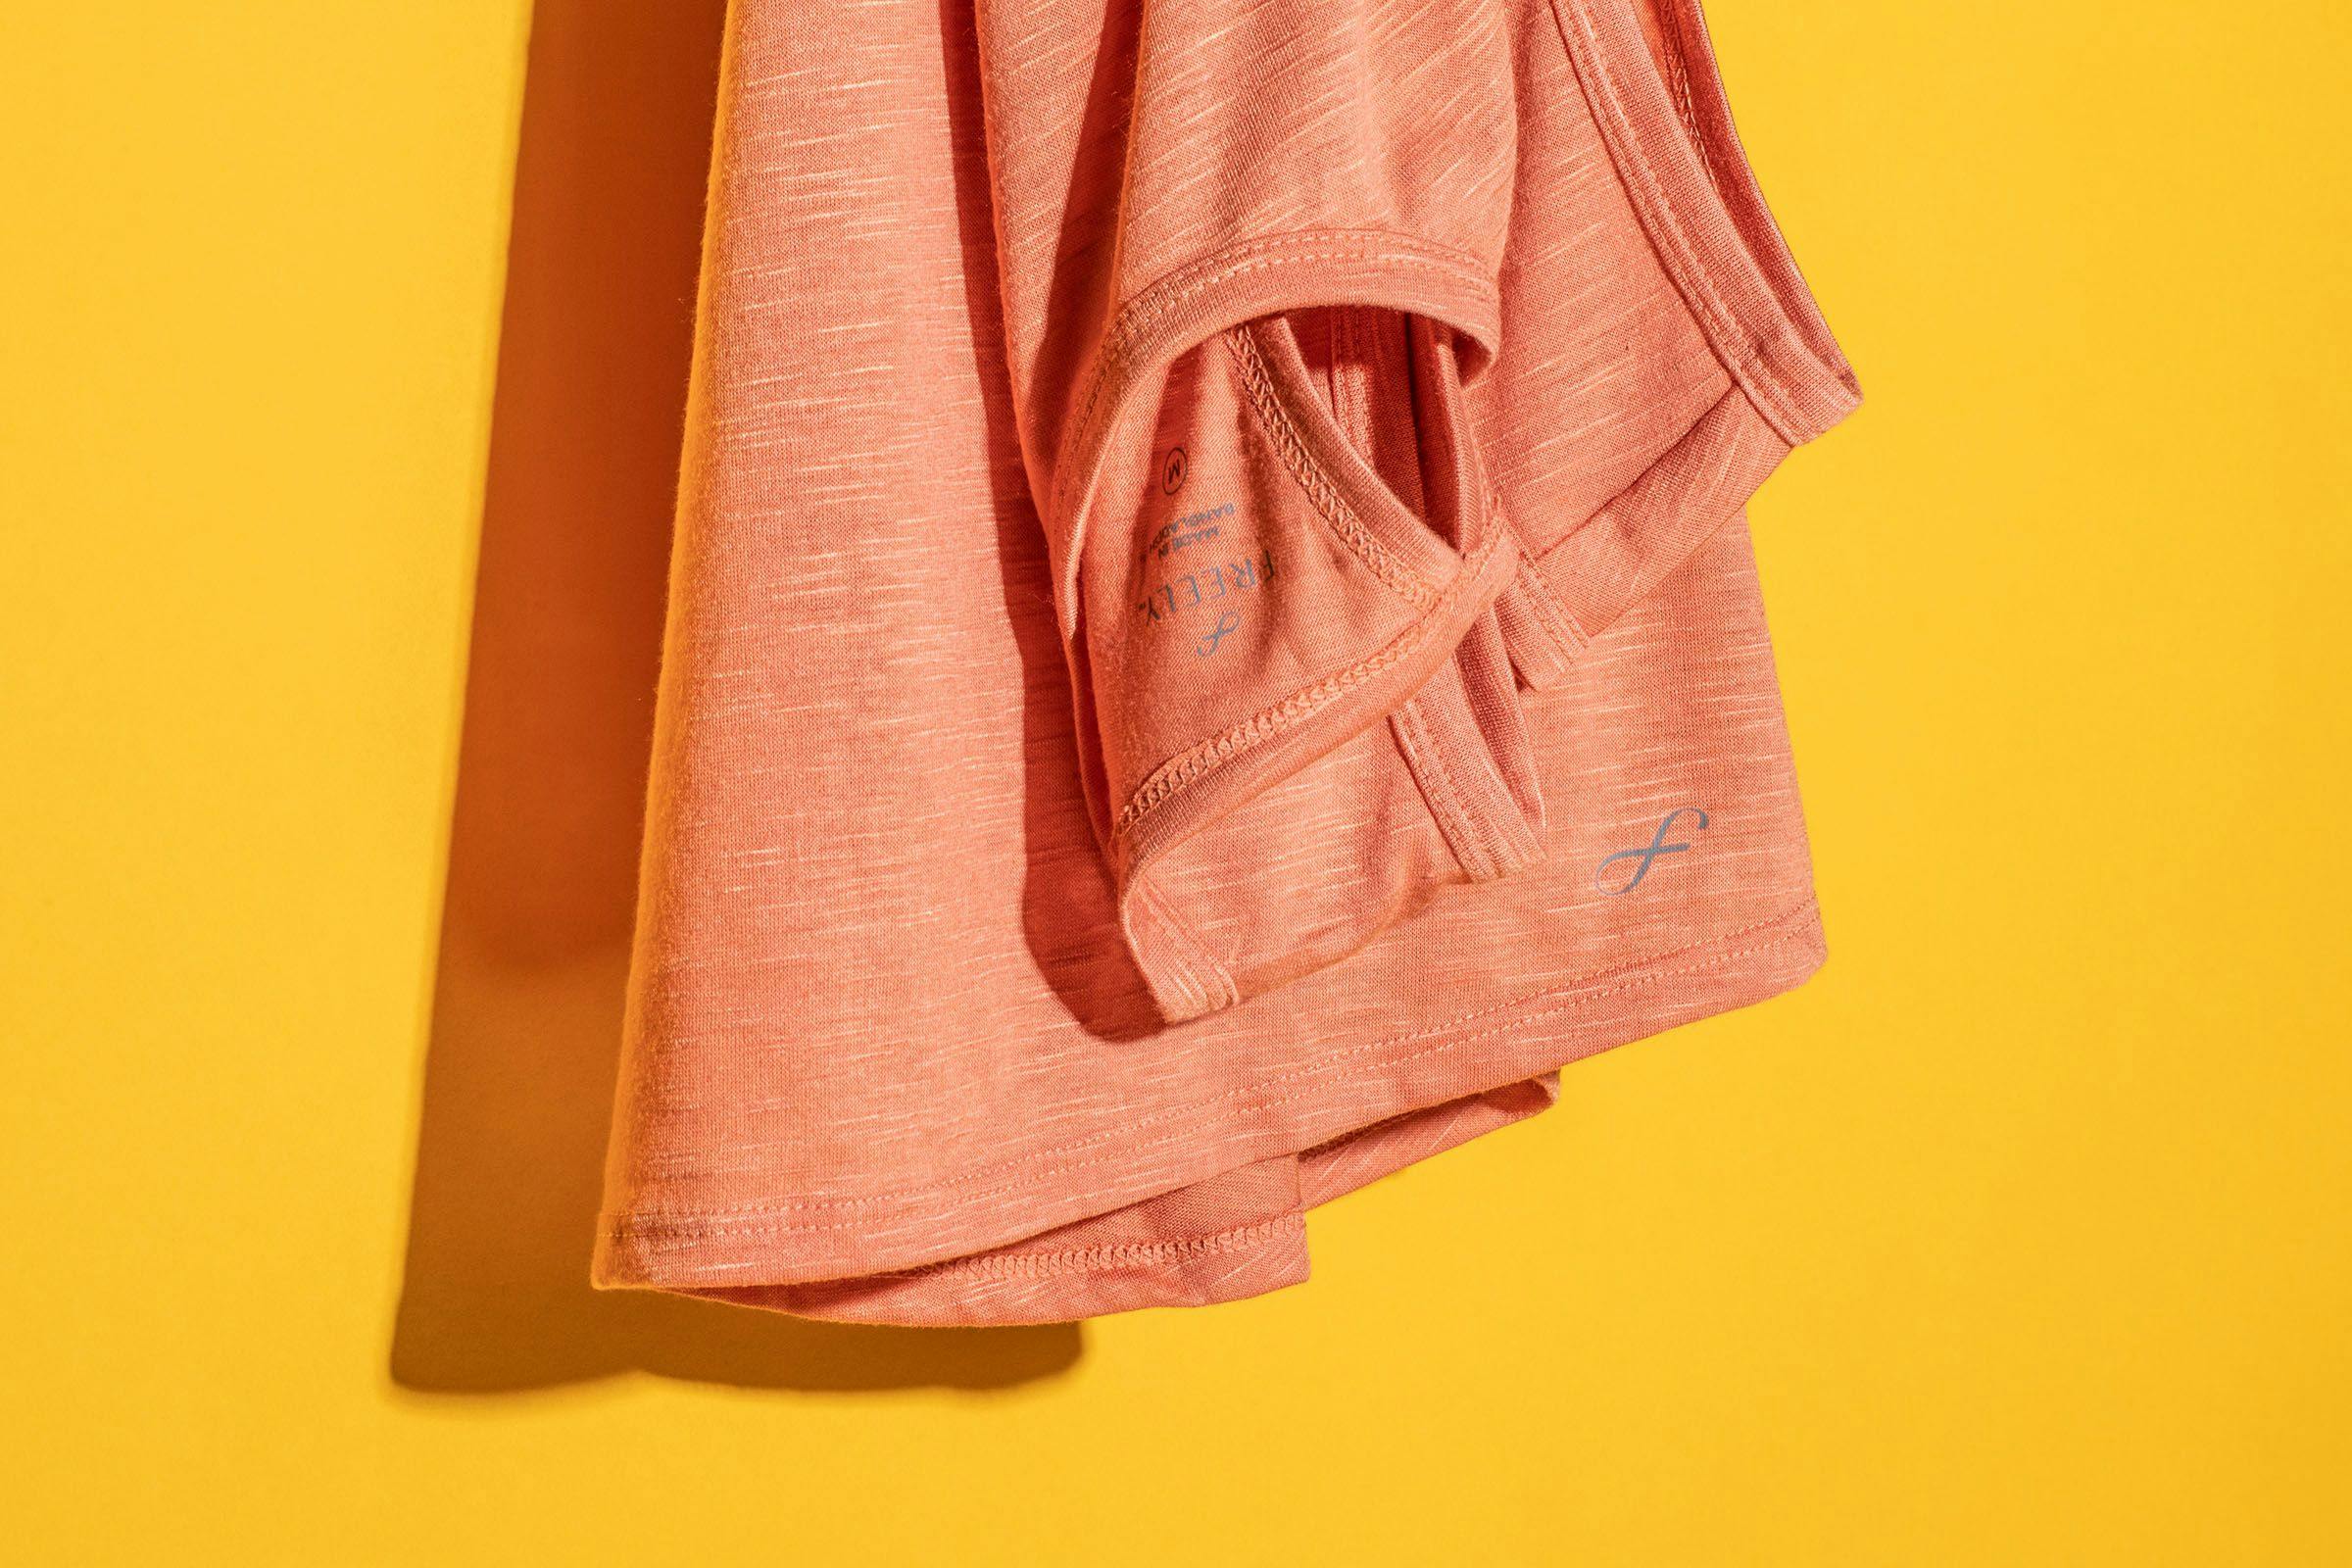 Folded Coral-Colored Tank Top Against a Yellow Background